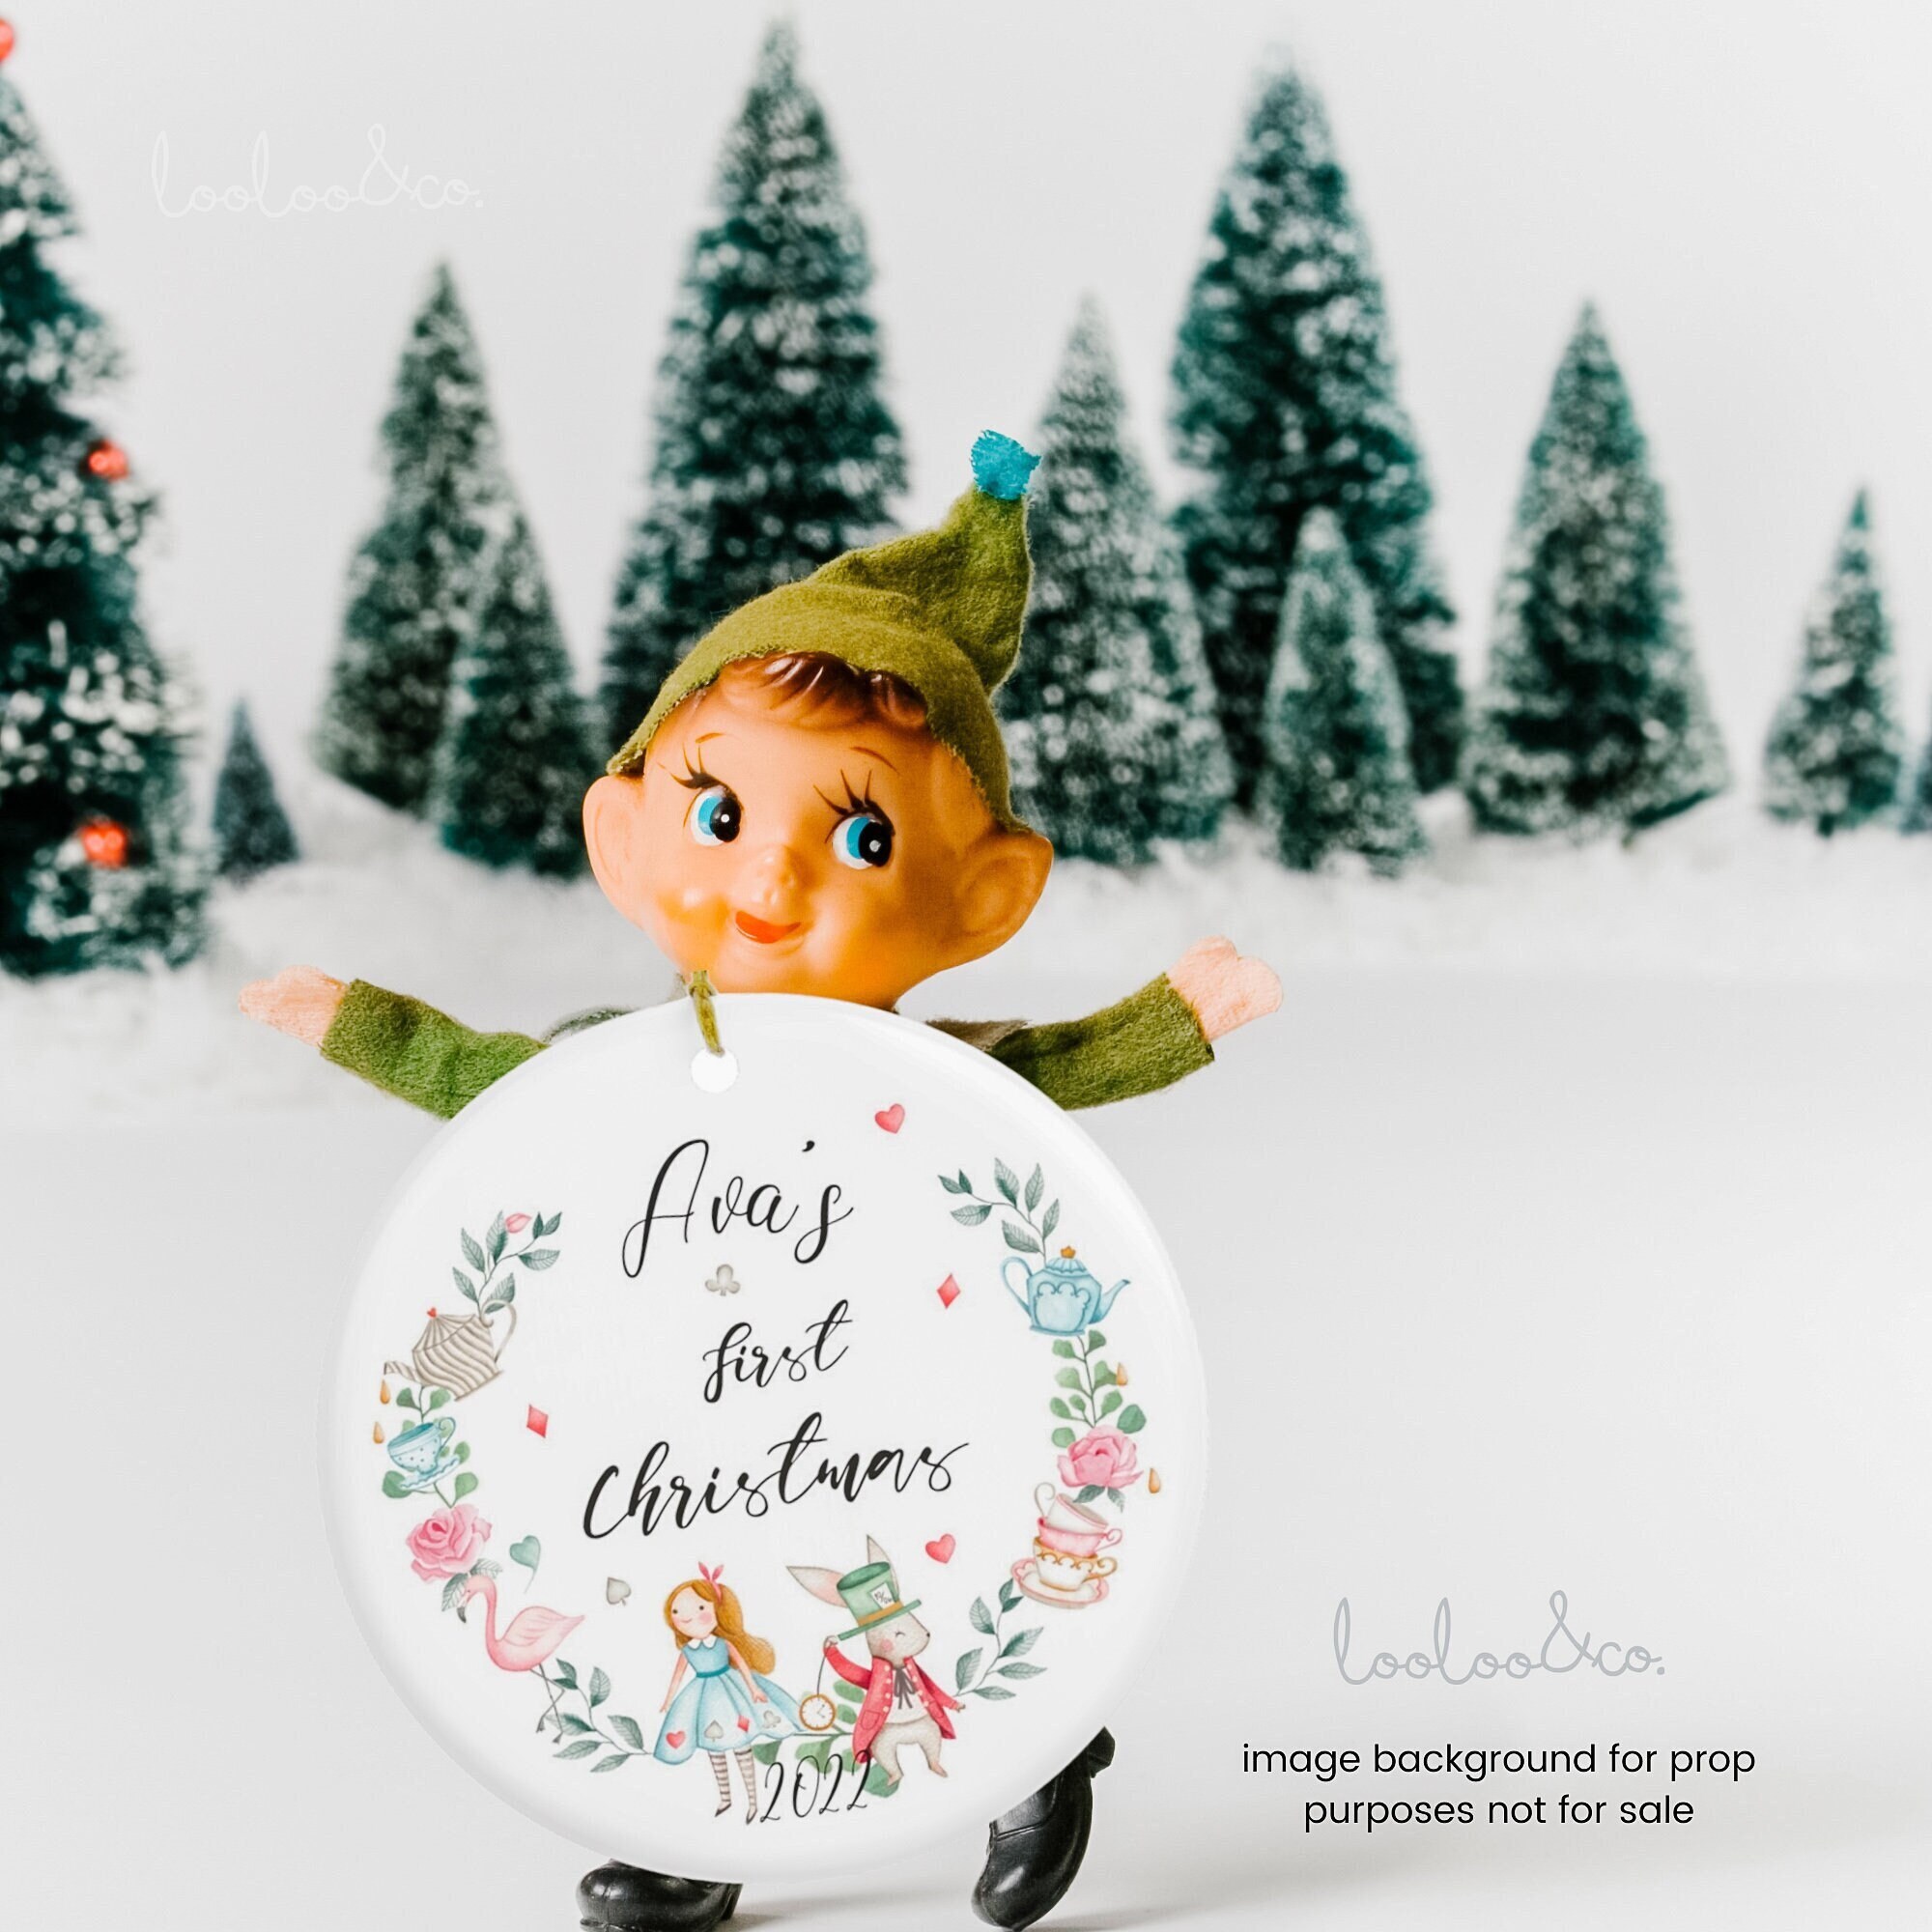 Alice in Wonderland Personalized Metal Christmas Ball Ornament The Holiday Aisle Customize: Yes